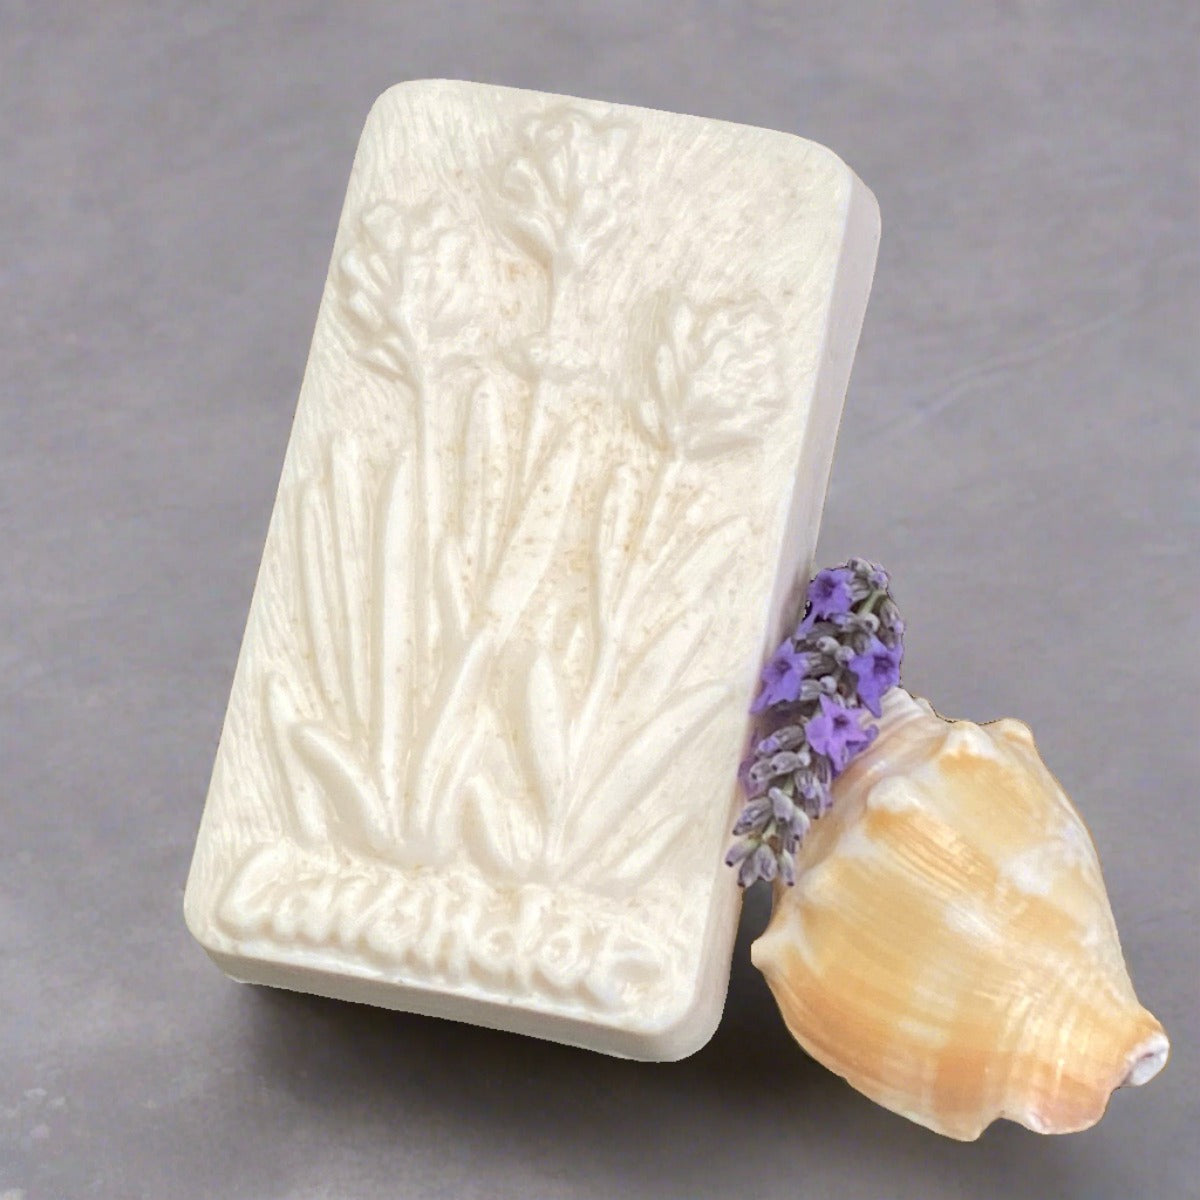 Moisturizing lavender and oatmeal soap bar for dry skin